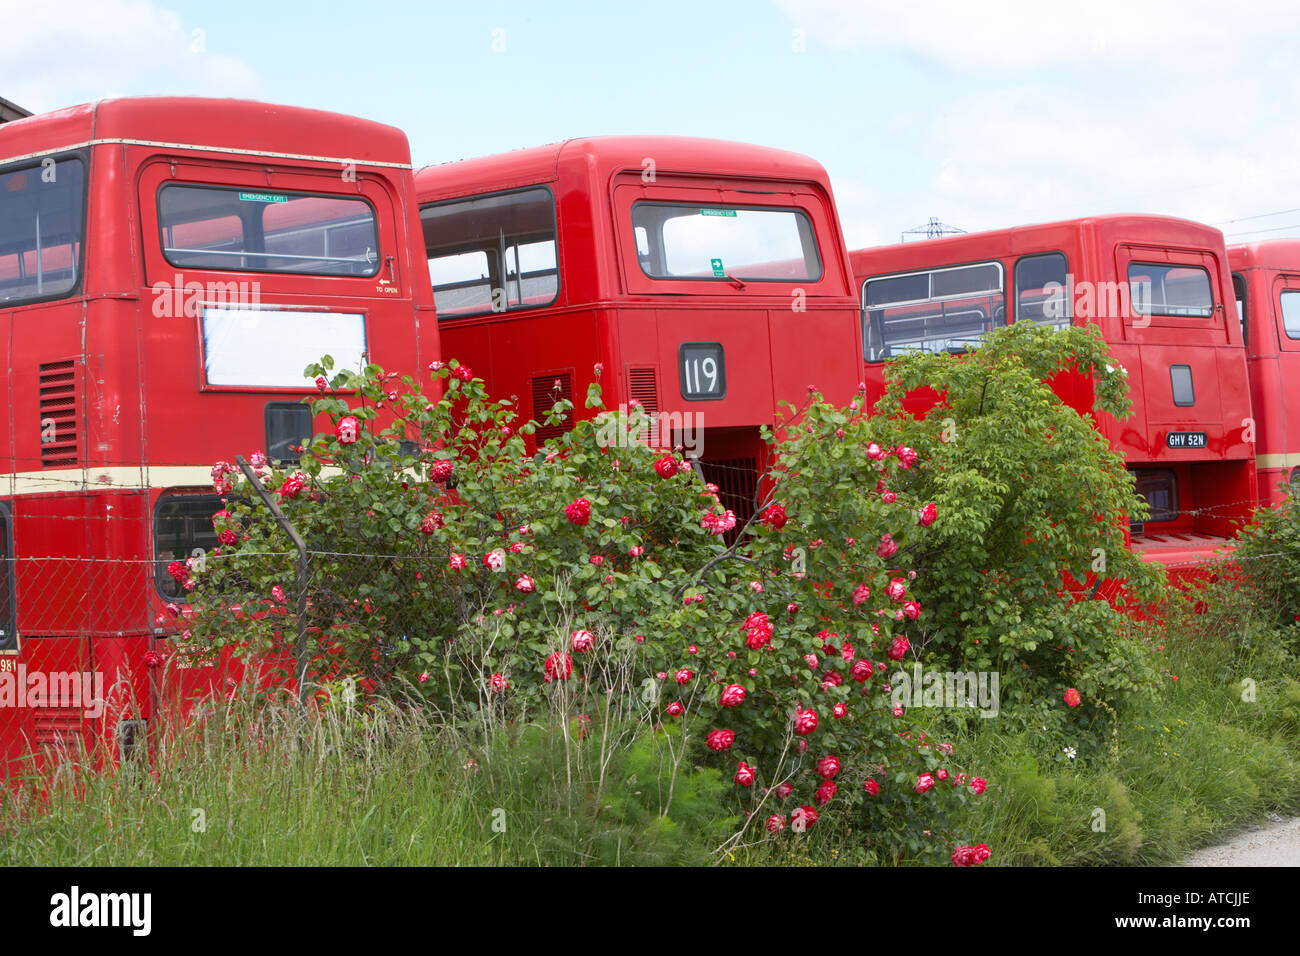 London routemaster double decker buses retired from service Stock Photo